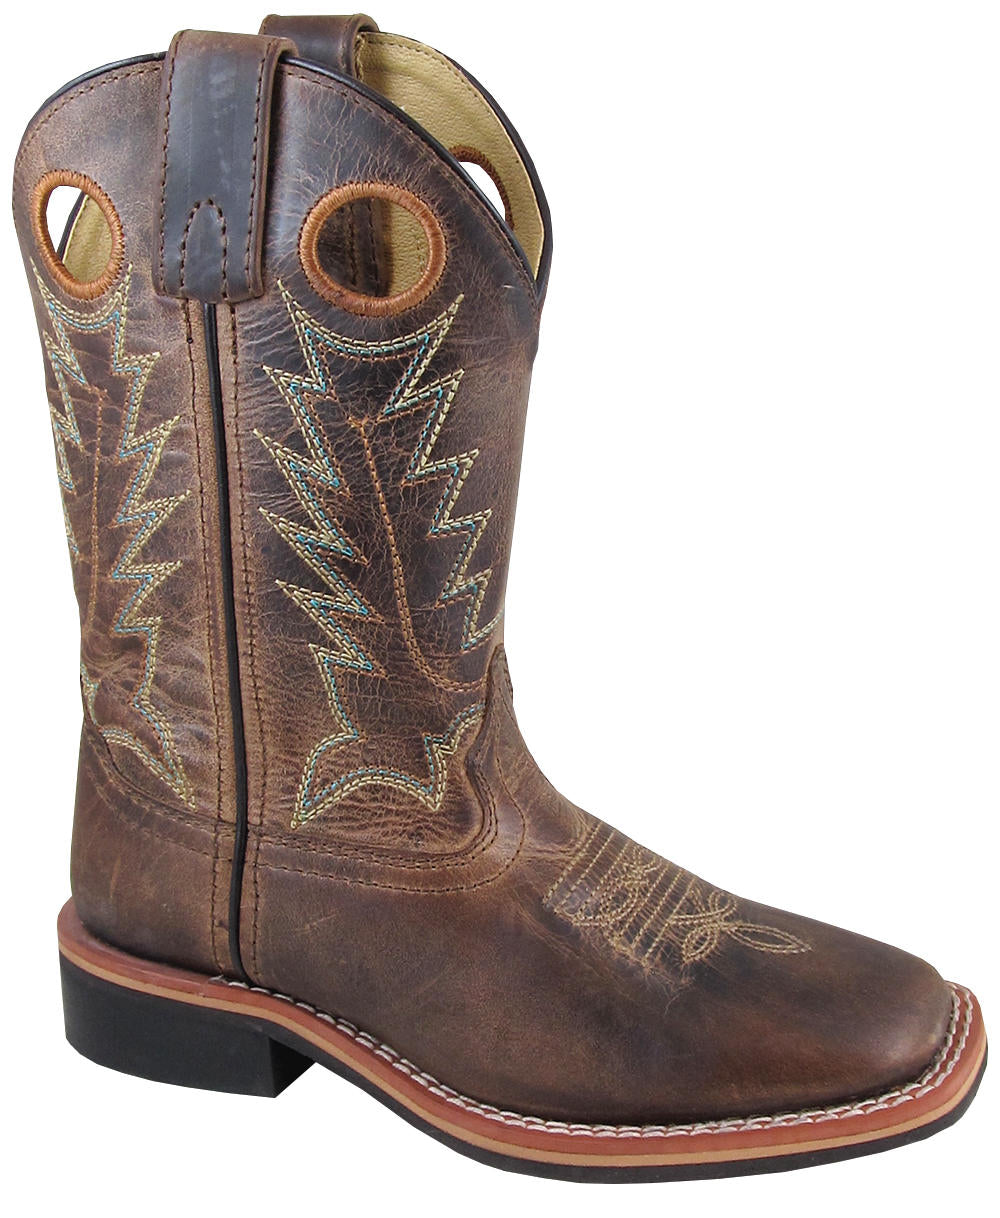 Pard's Western Shop Smoky Mountain Boots Waxed Distressed Brown Square Toe Jesse Boots for Youth